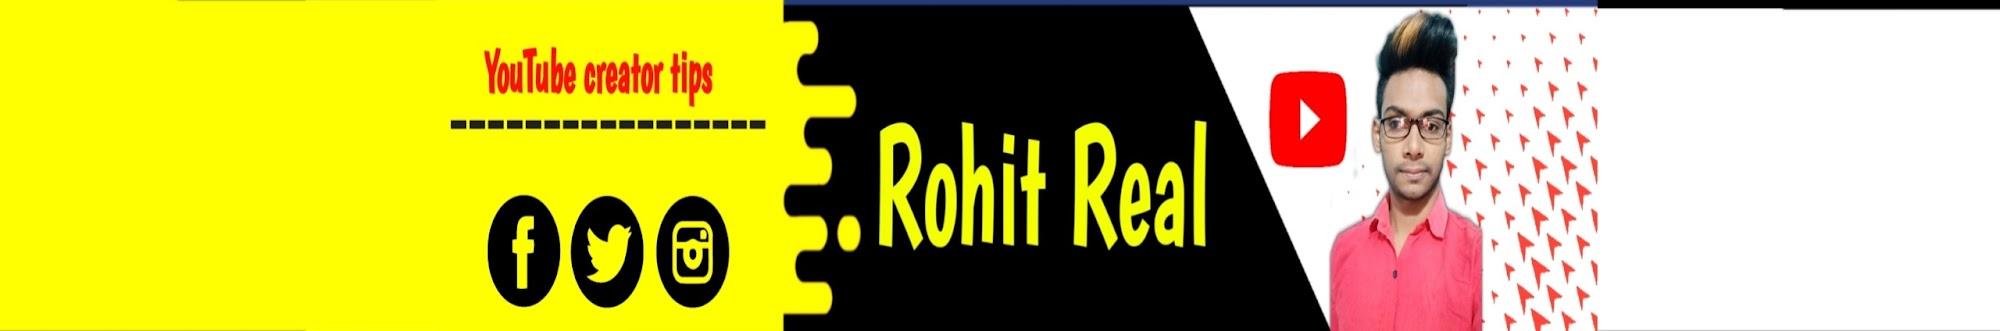 Rohit Real